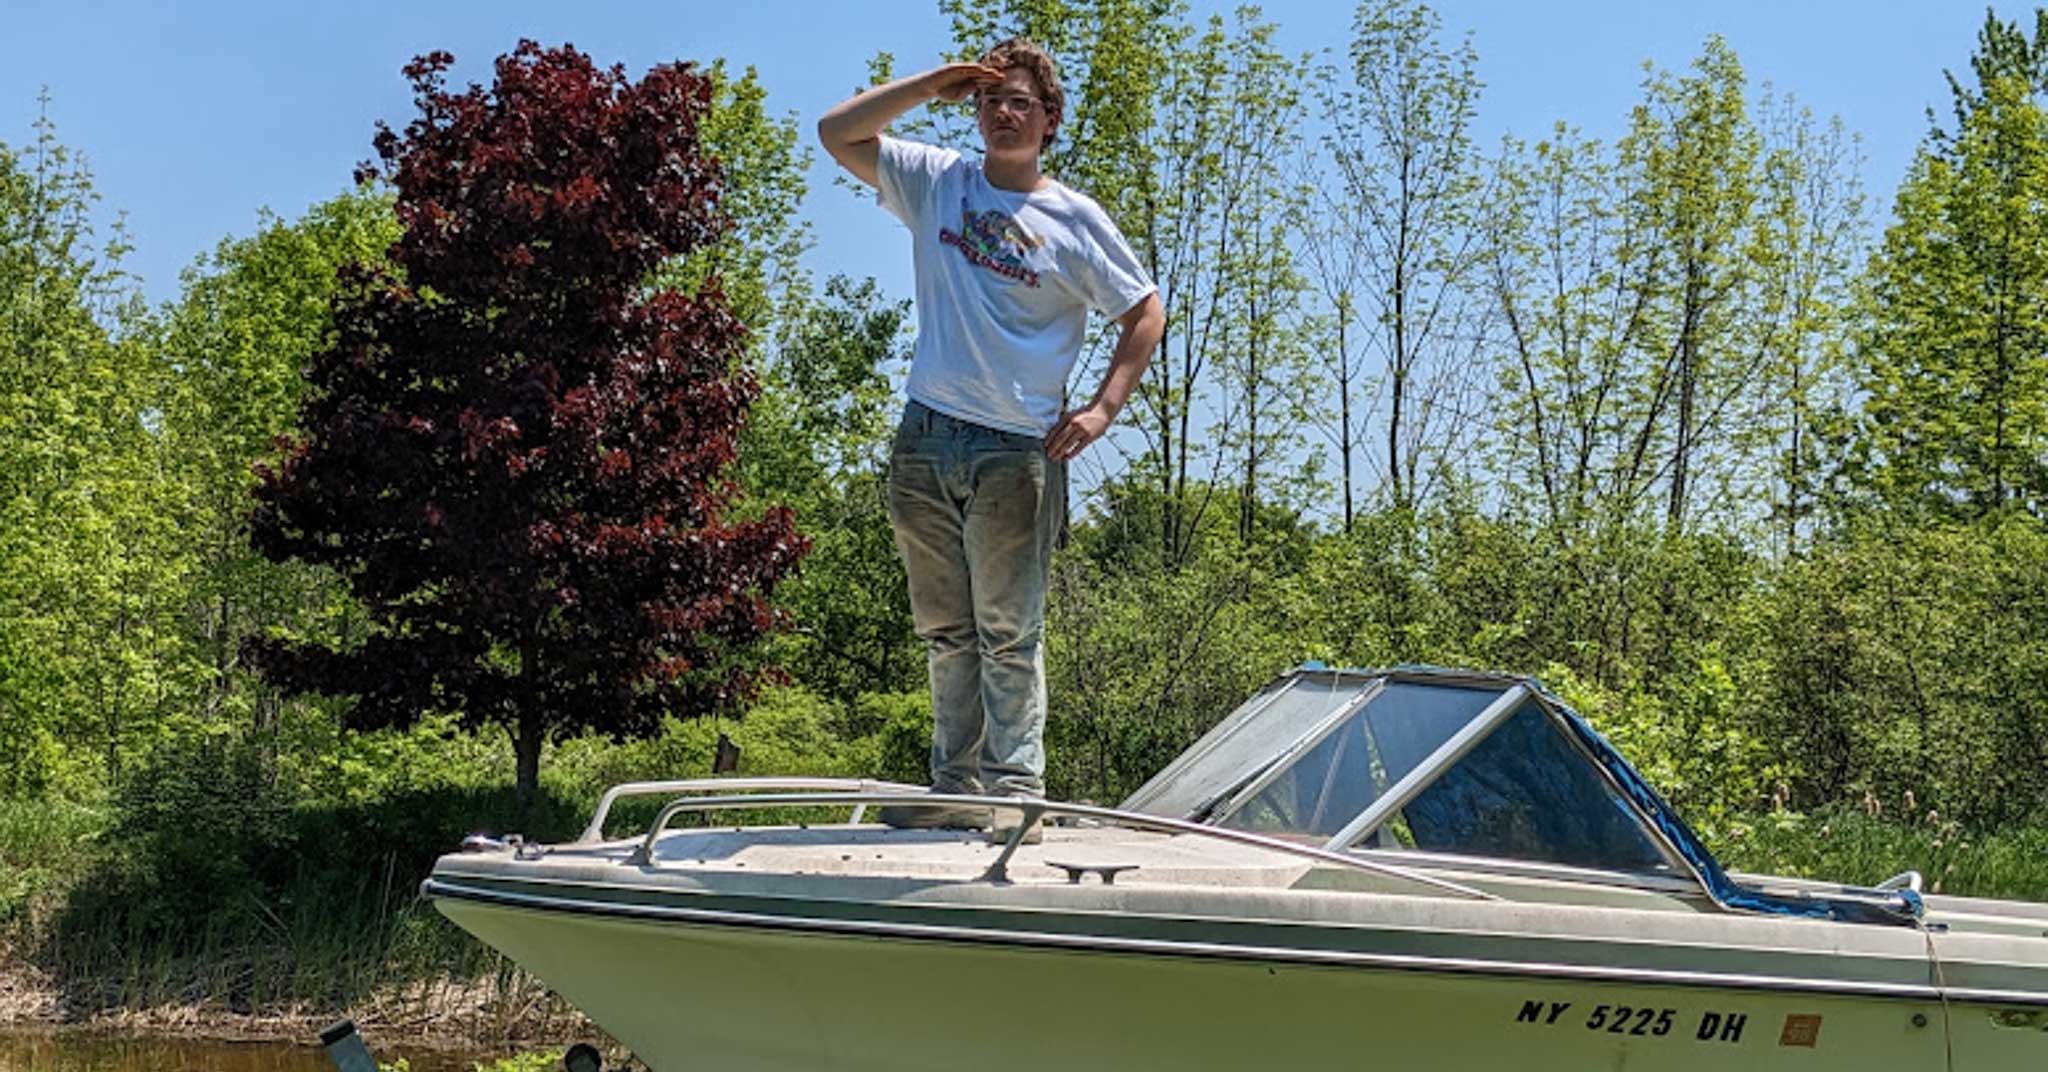 Teen stands with arm raised on hood of boat.